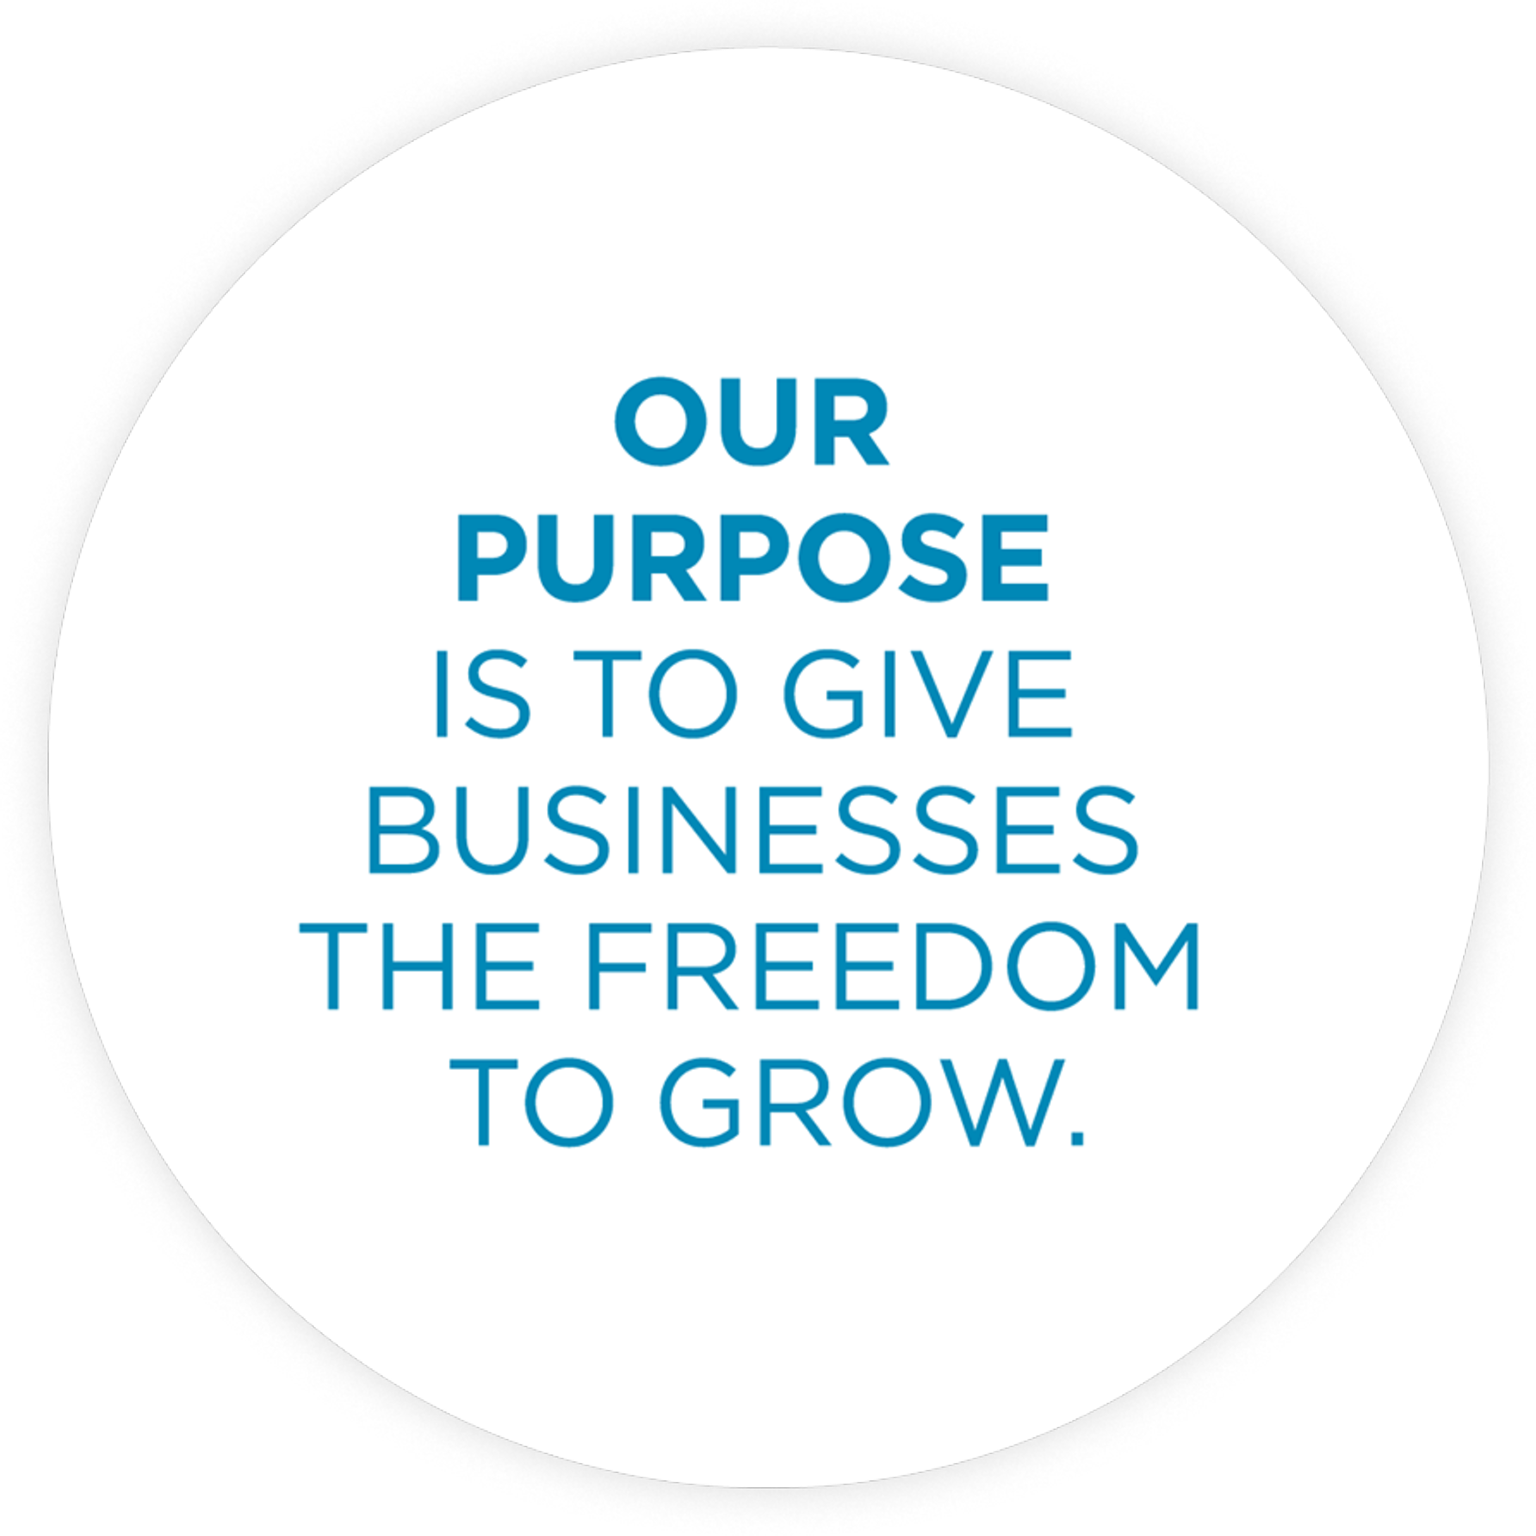 Our purpose is to give businesses the freedom to grow